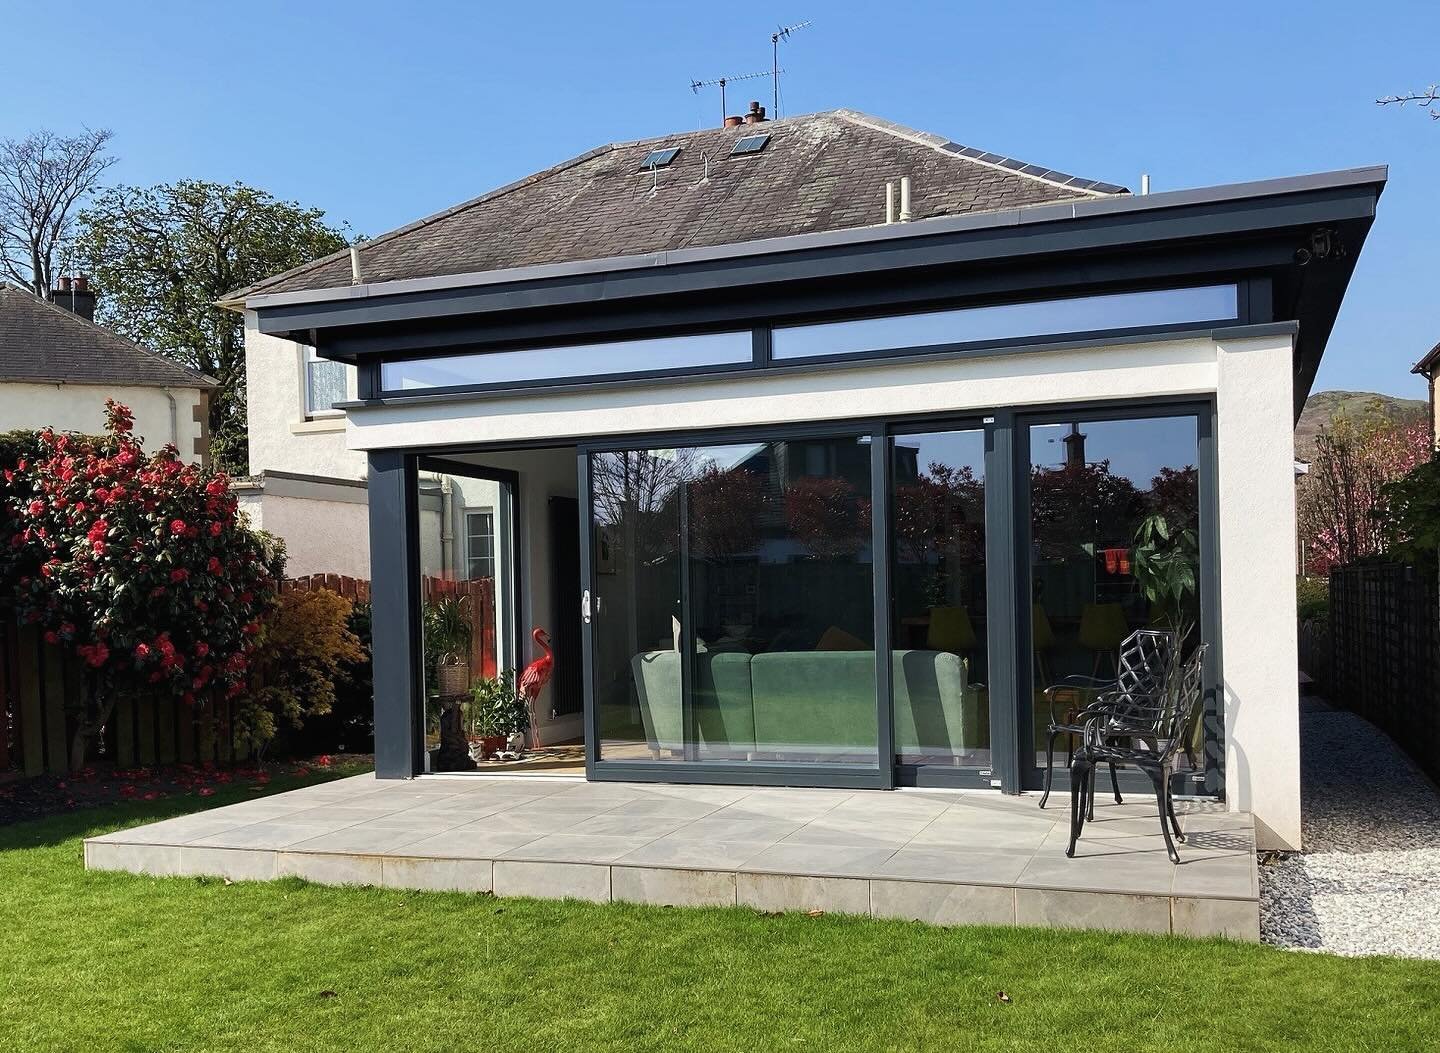 A sunny spring day! The perfect time to slide open the glass door at our &lsquo;Raising the Roof&rsquo; extension in Duddingston, Edinburgh, to welcome in the fine weather.
.
#houseextension 
#glassdoor 
#gardenroom 
#sunshine 
#slidingdoors 
#dontmo